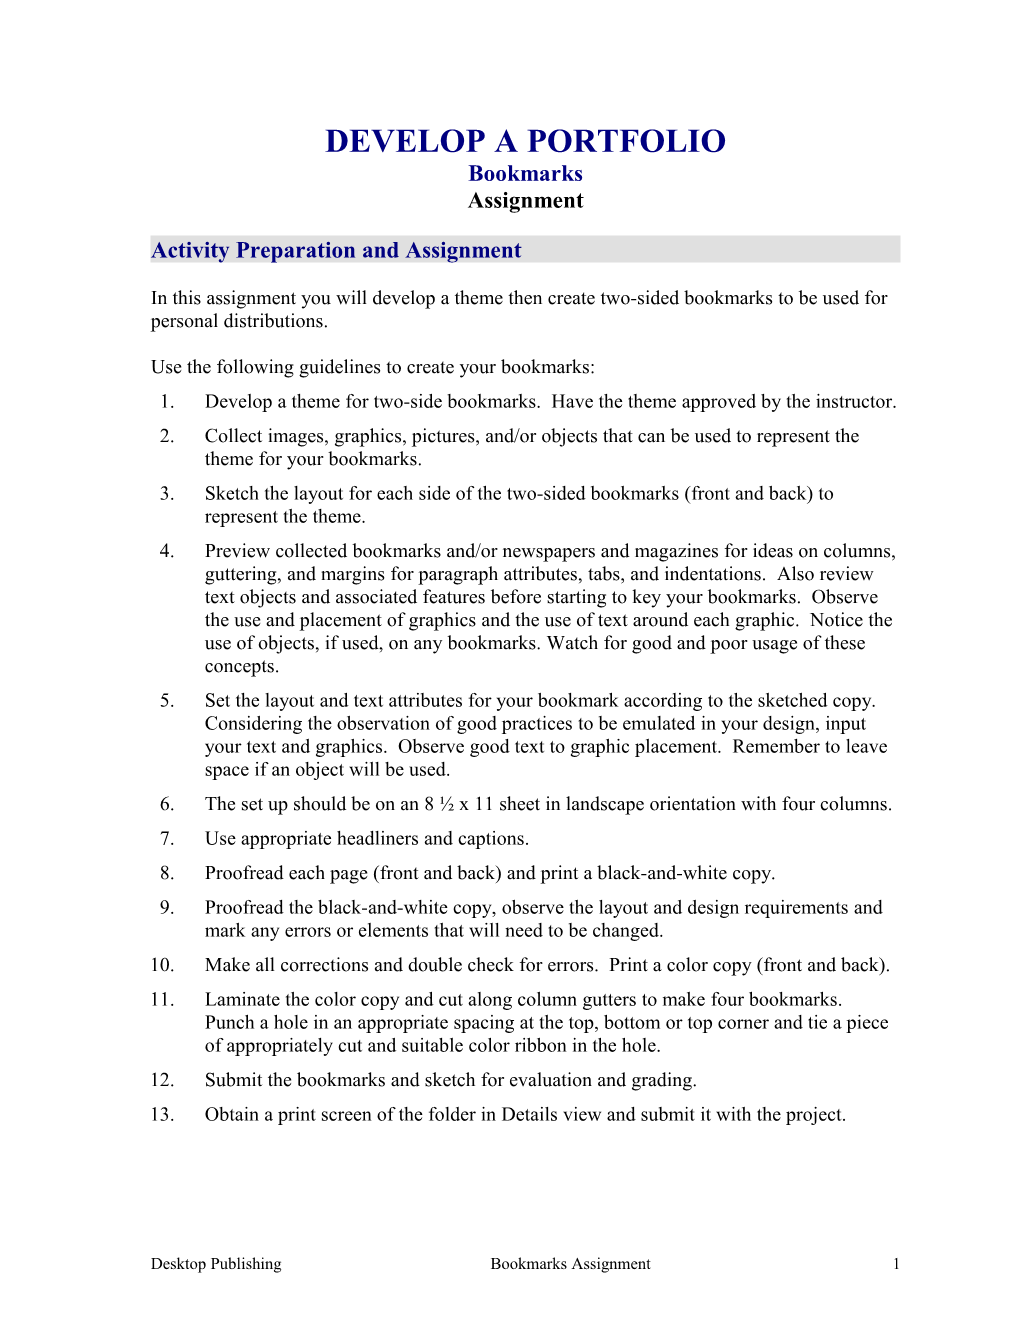 Activity Preparation and Assignment